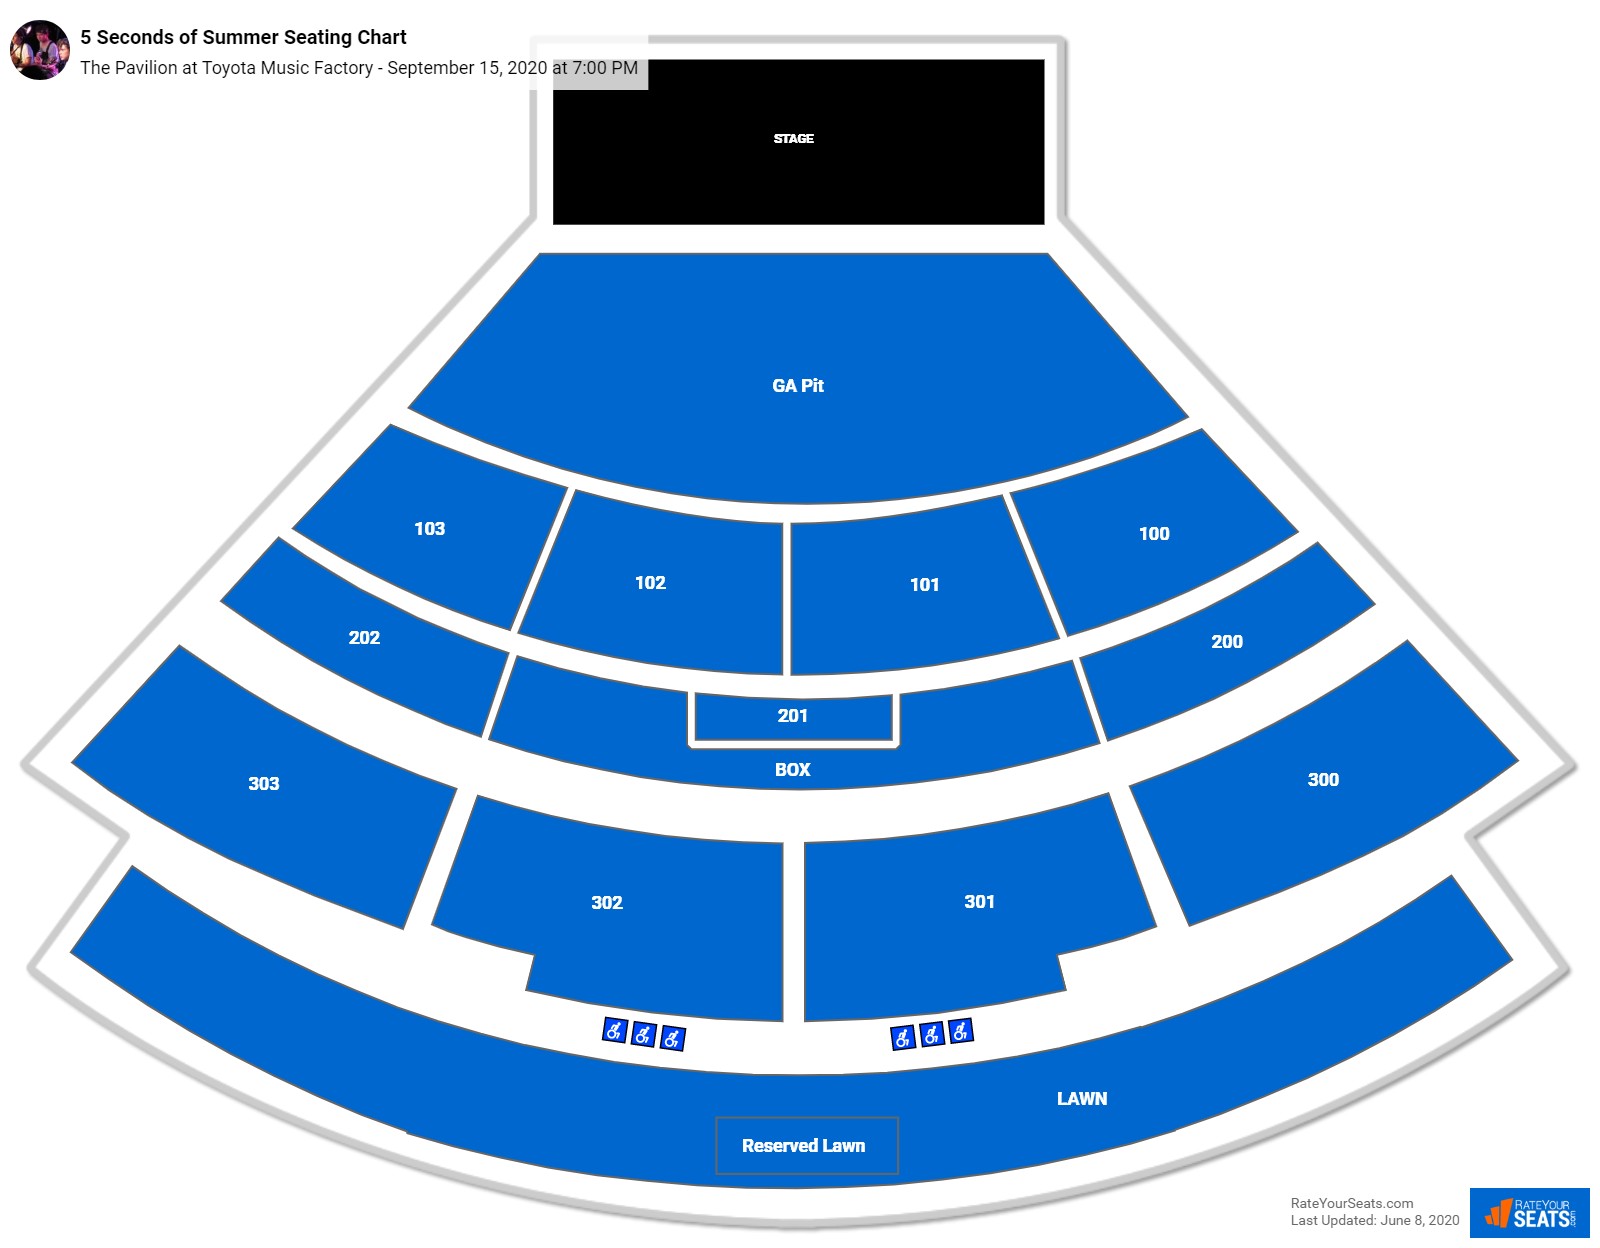 The Pavilion at Toyota Music Factory Seating Chart - RateYourSeats.com